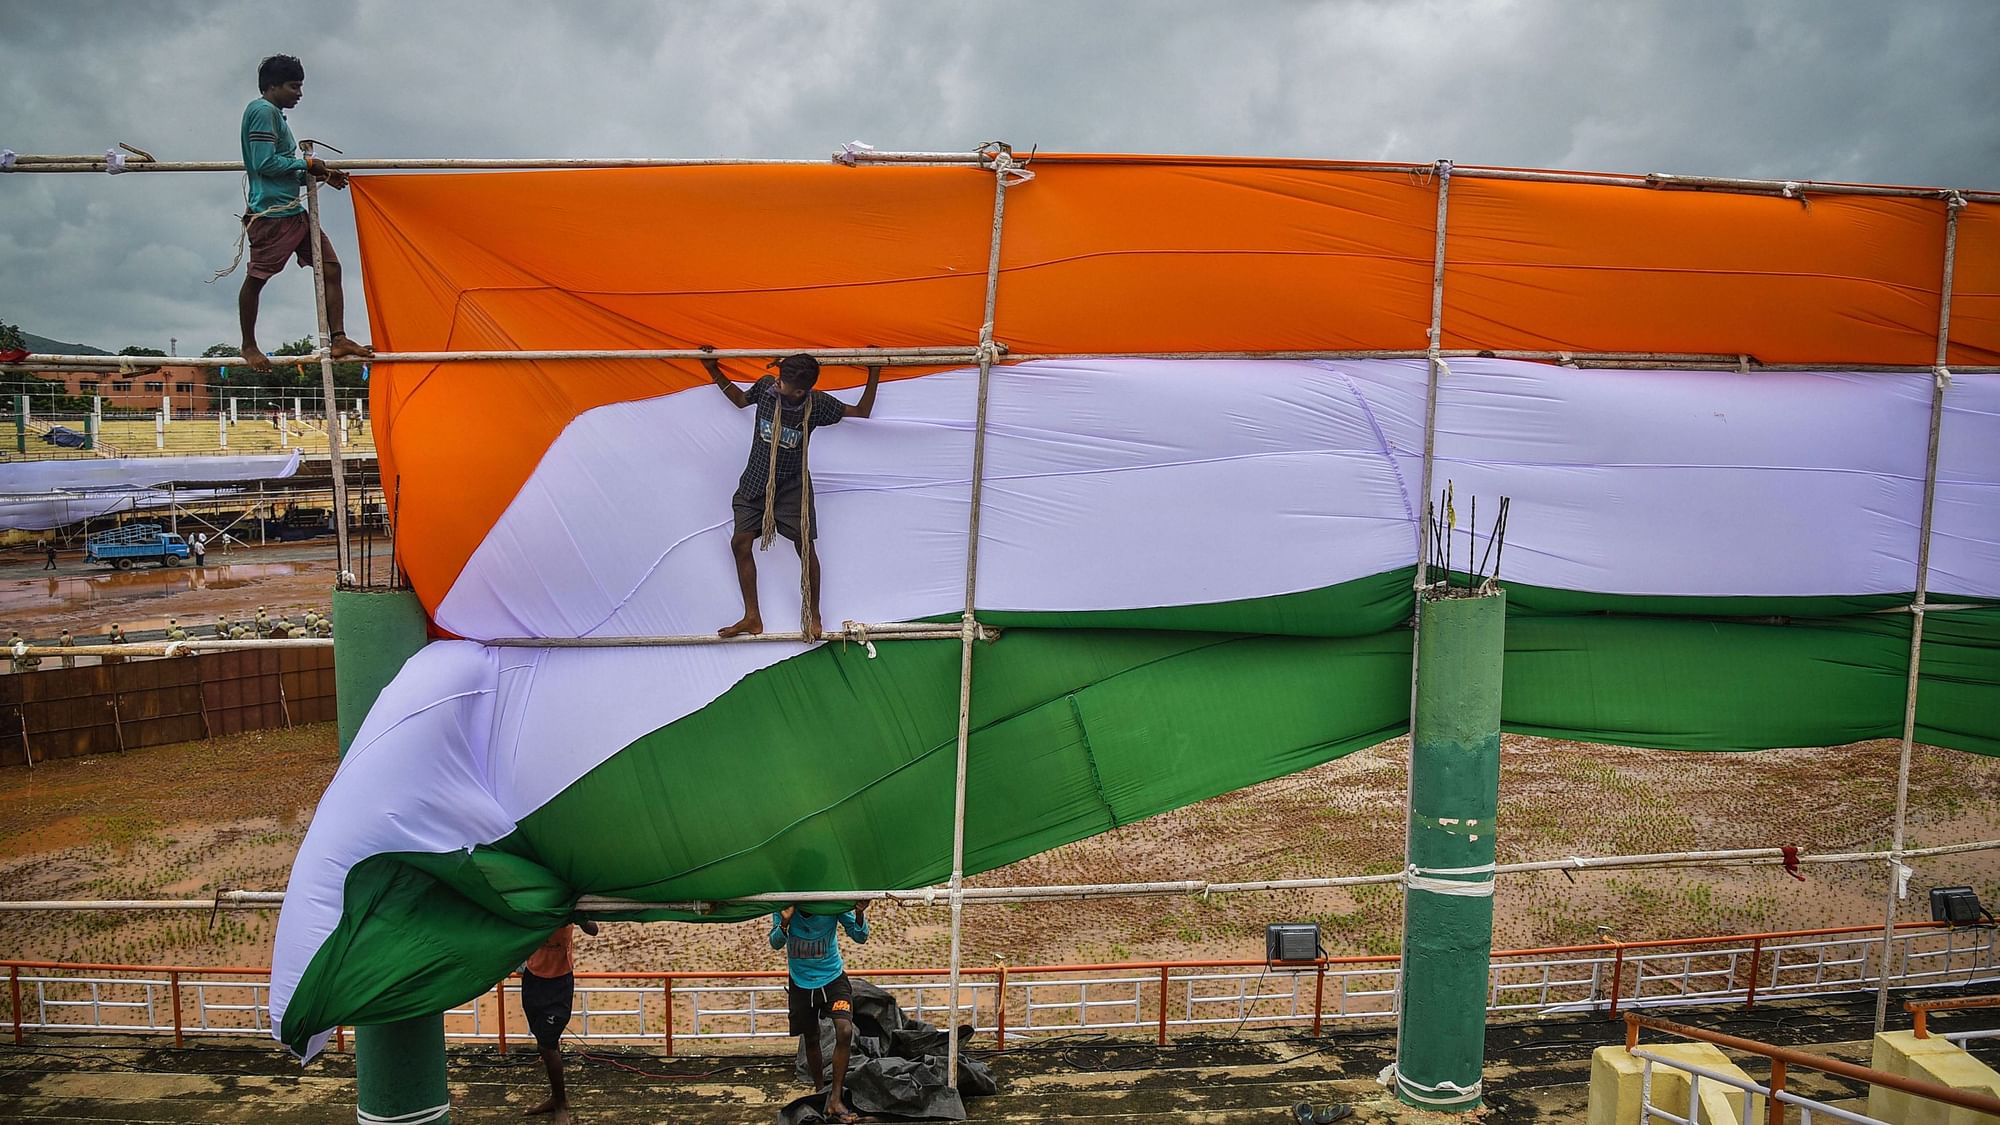 Workers busy in preparations for the upcoming 74th Independence Day celebrations, at Indira Gandhi Municipal Corporation Stadium in Vijayawada. &nbsp;